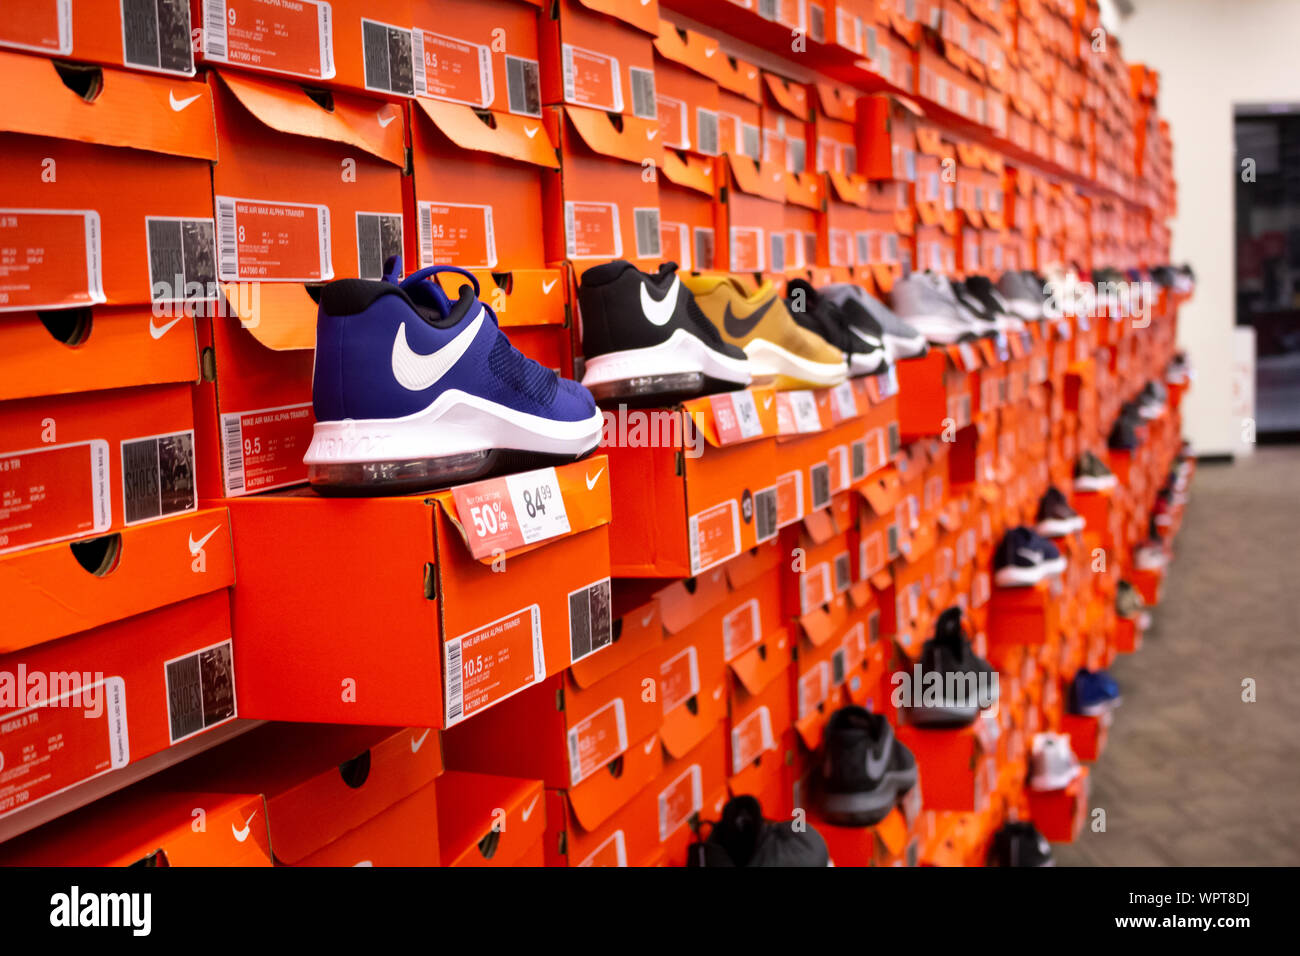 Soest, Germany - July 29, 2019: Nike shoe box in the store Stock Photo